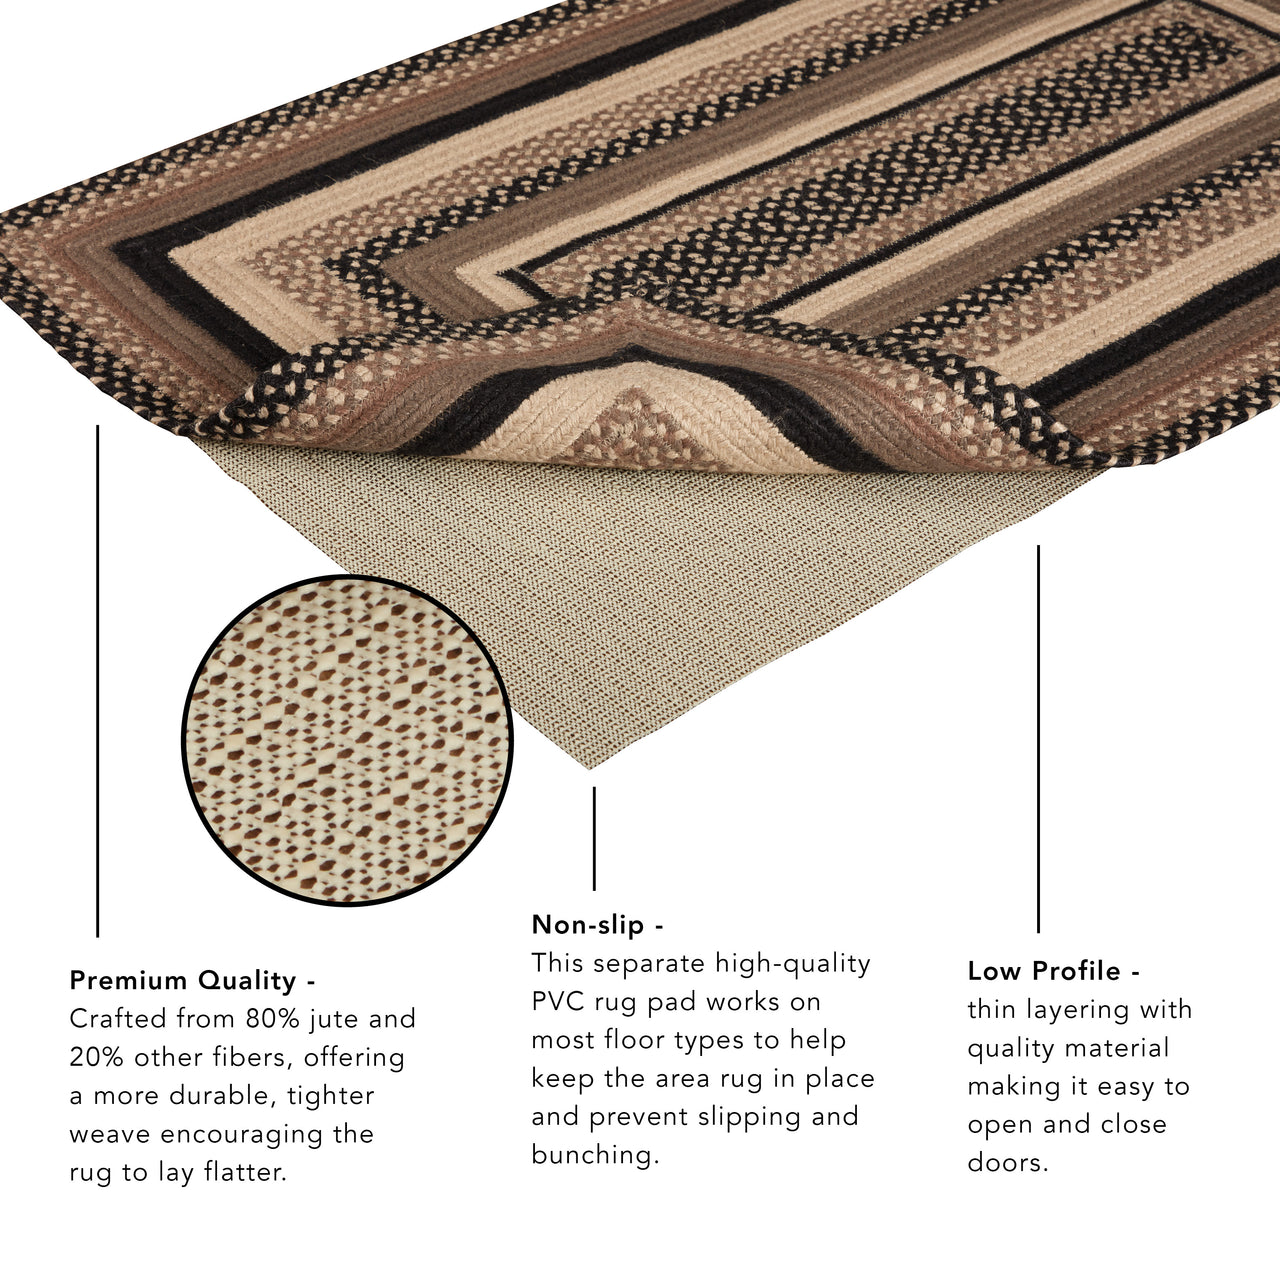 Espresso Jute Braided Rug Rect with Rug Pad 27"x48" VHC Brands